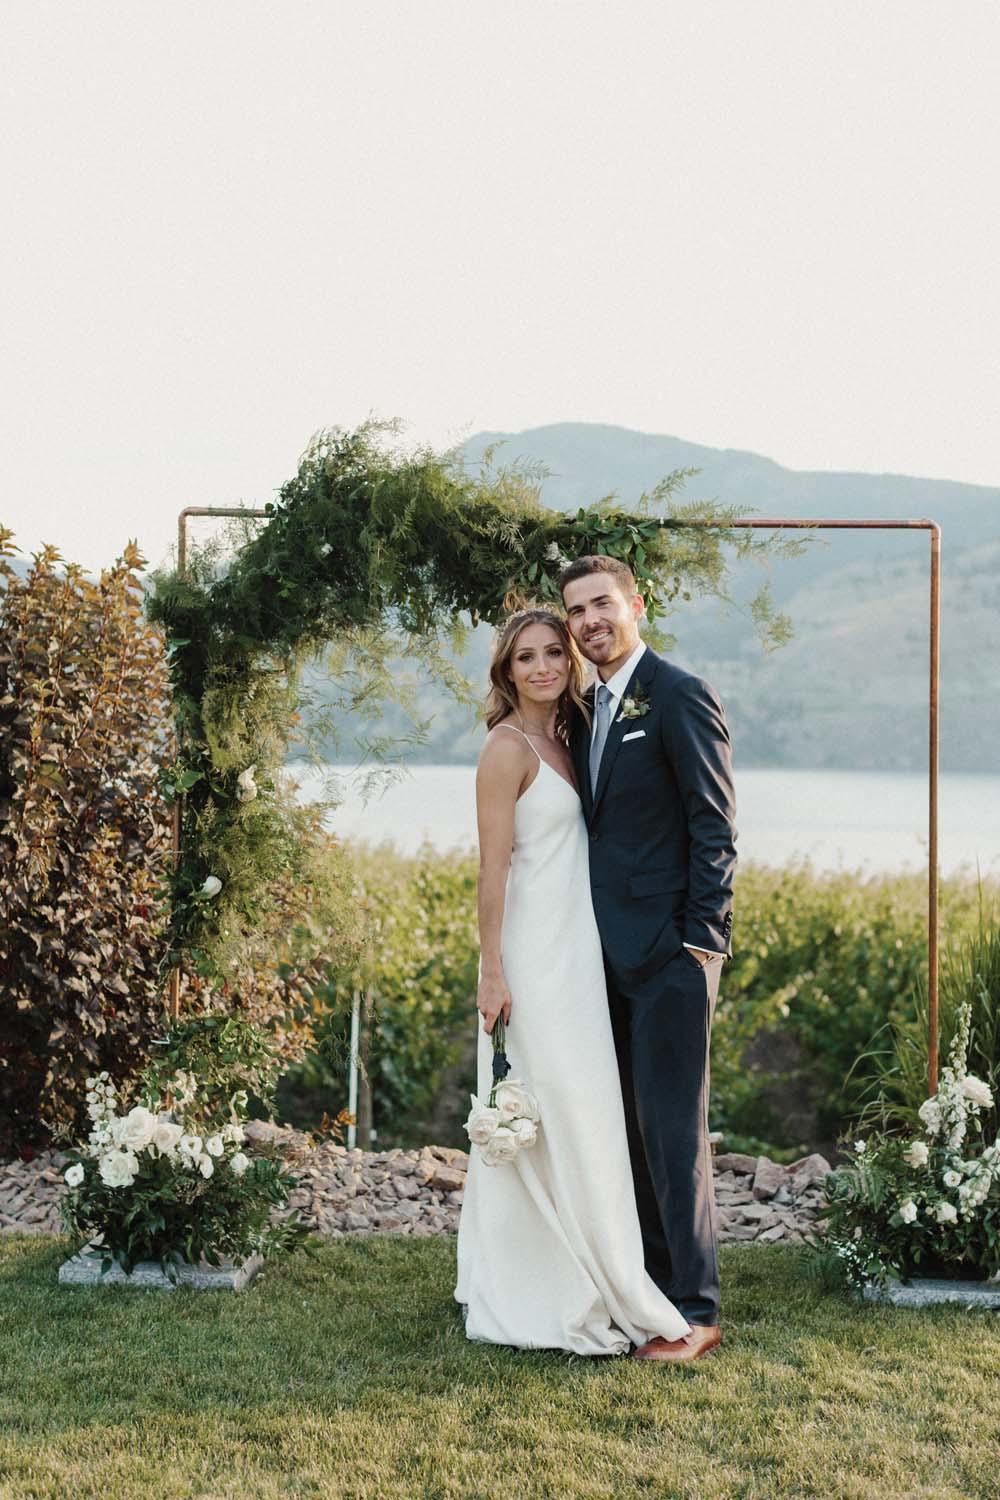 Jill Lansky of The August Diaries' Modern-Chic Wedding In British Columbia - bride and groom